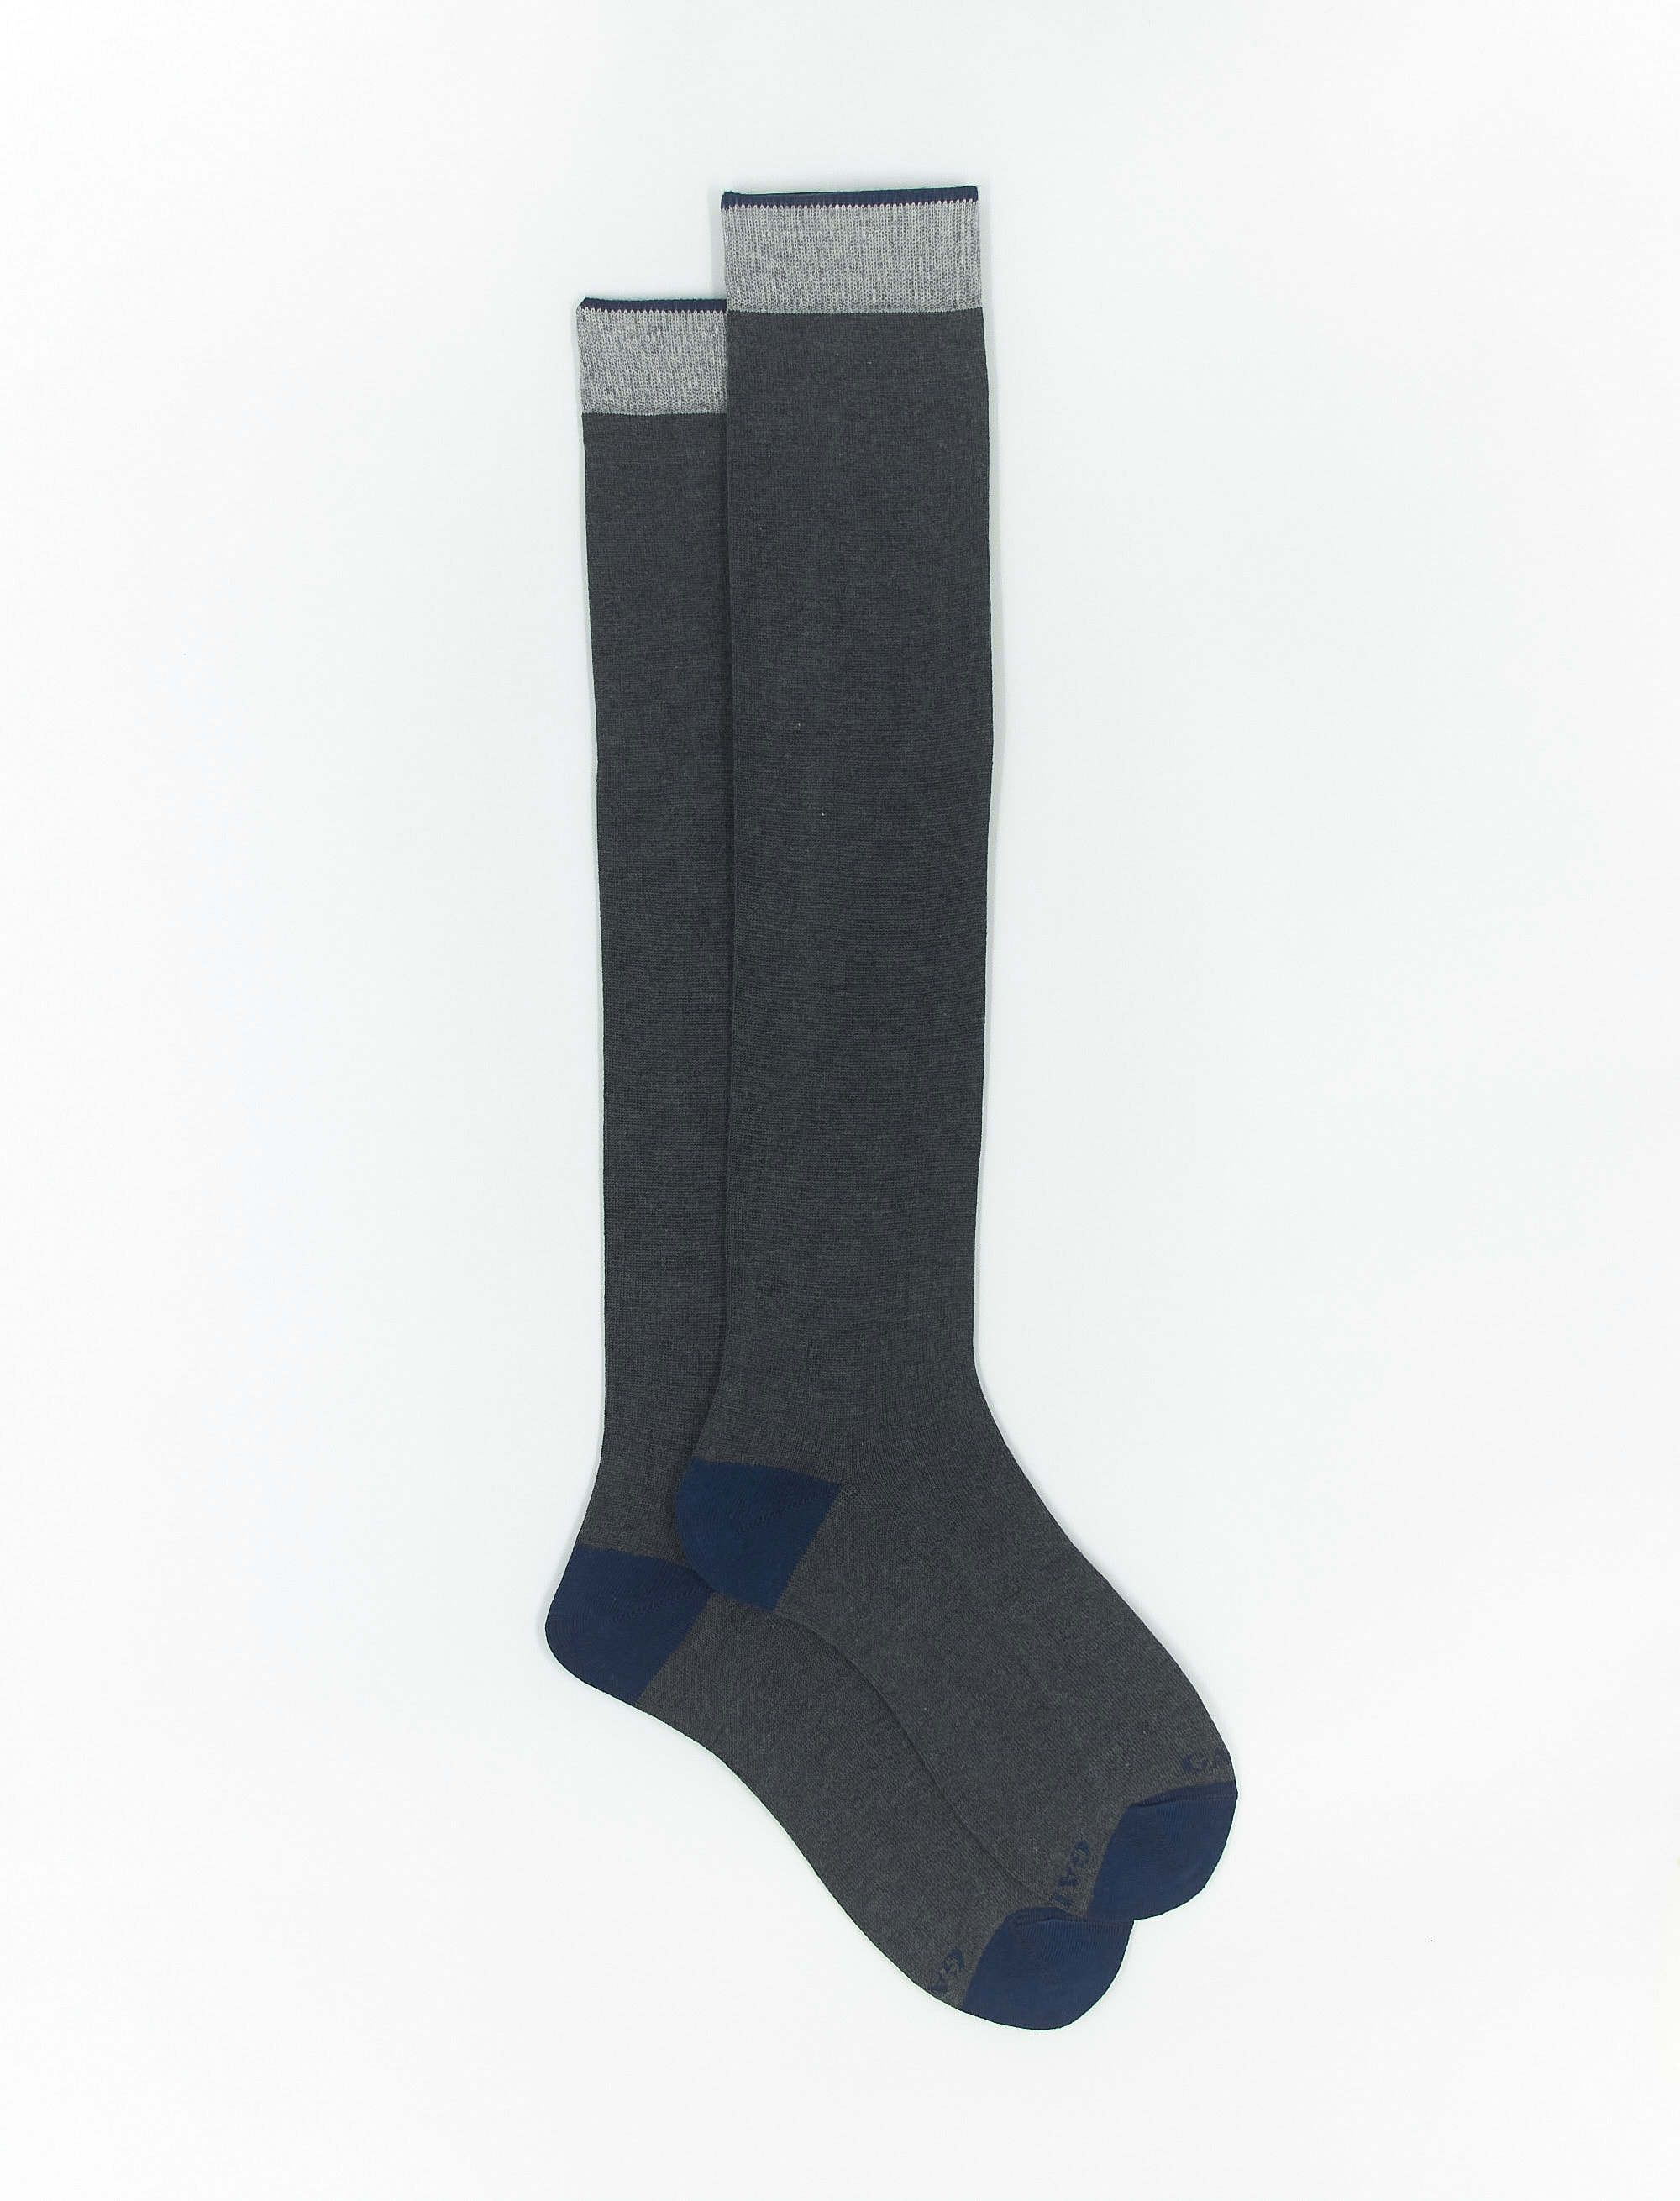 Women's long plain stone grey cotton and cashmere socks with contrasting details - Socks | Gallo 1927 - Official Online Shop